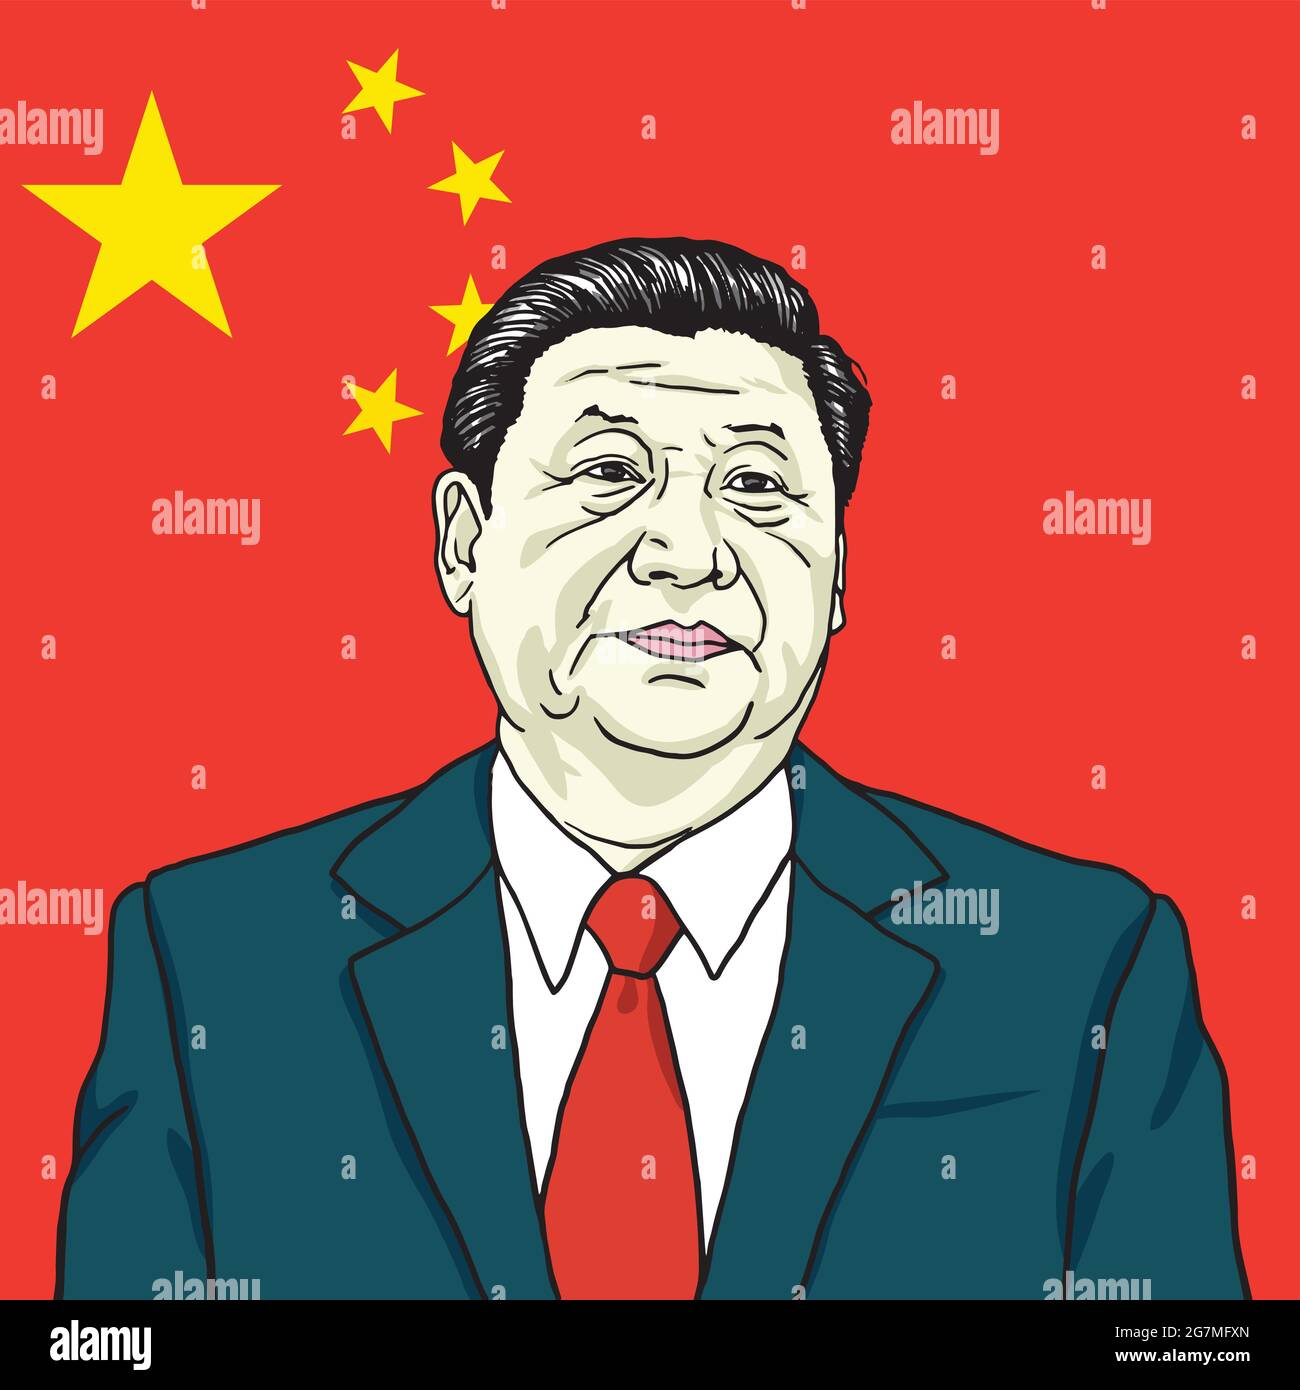 Xi Jinping Vector Portrait  Illustration with People's Republic of China Flag Background Stock Vector